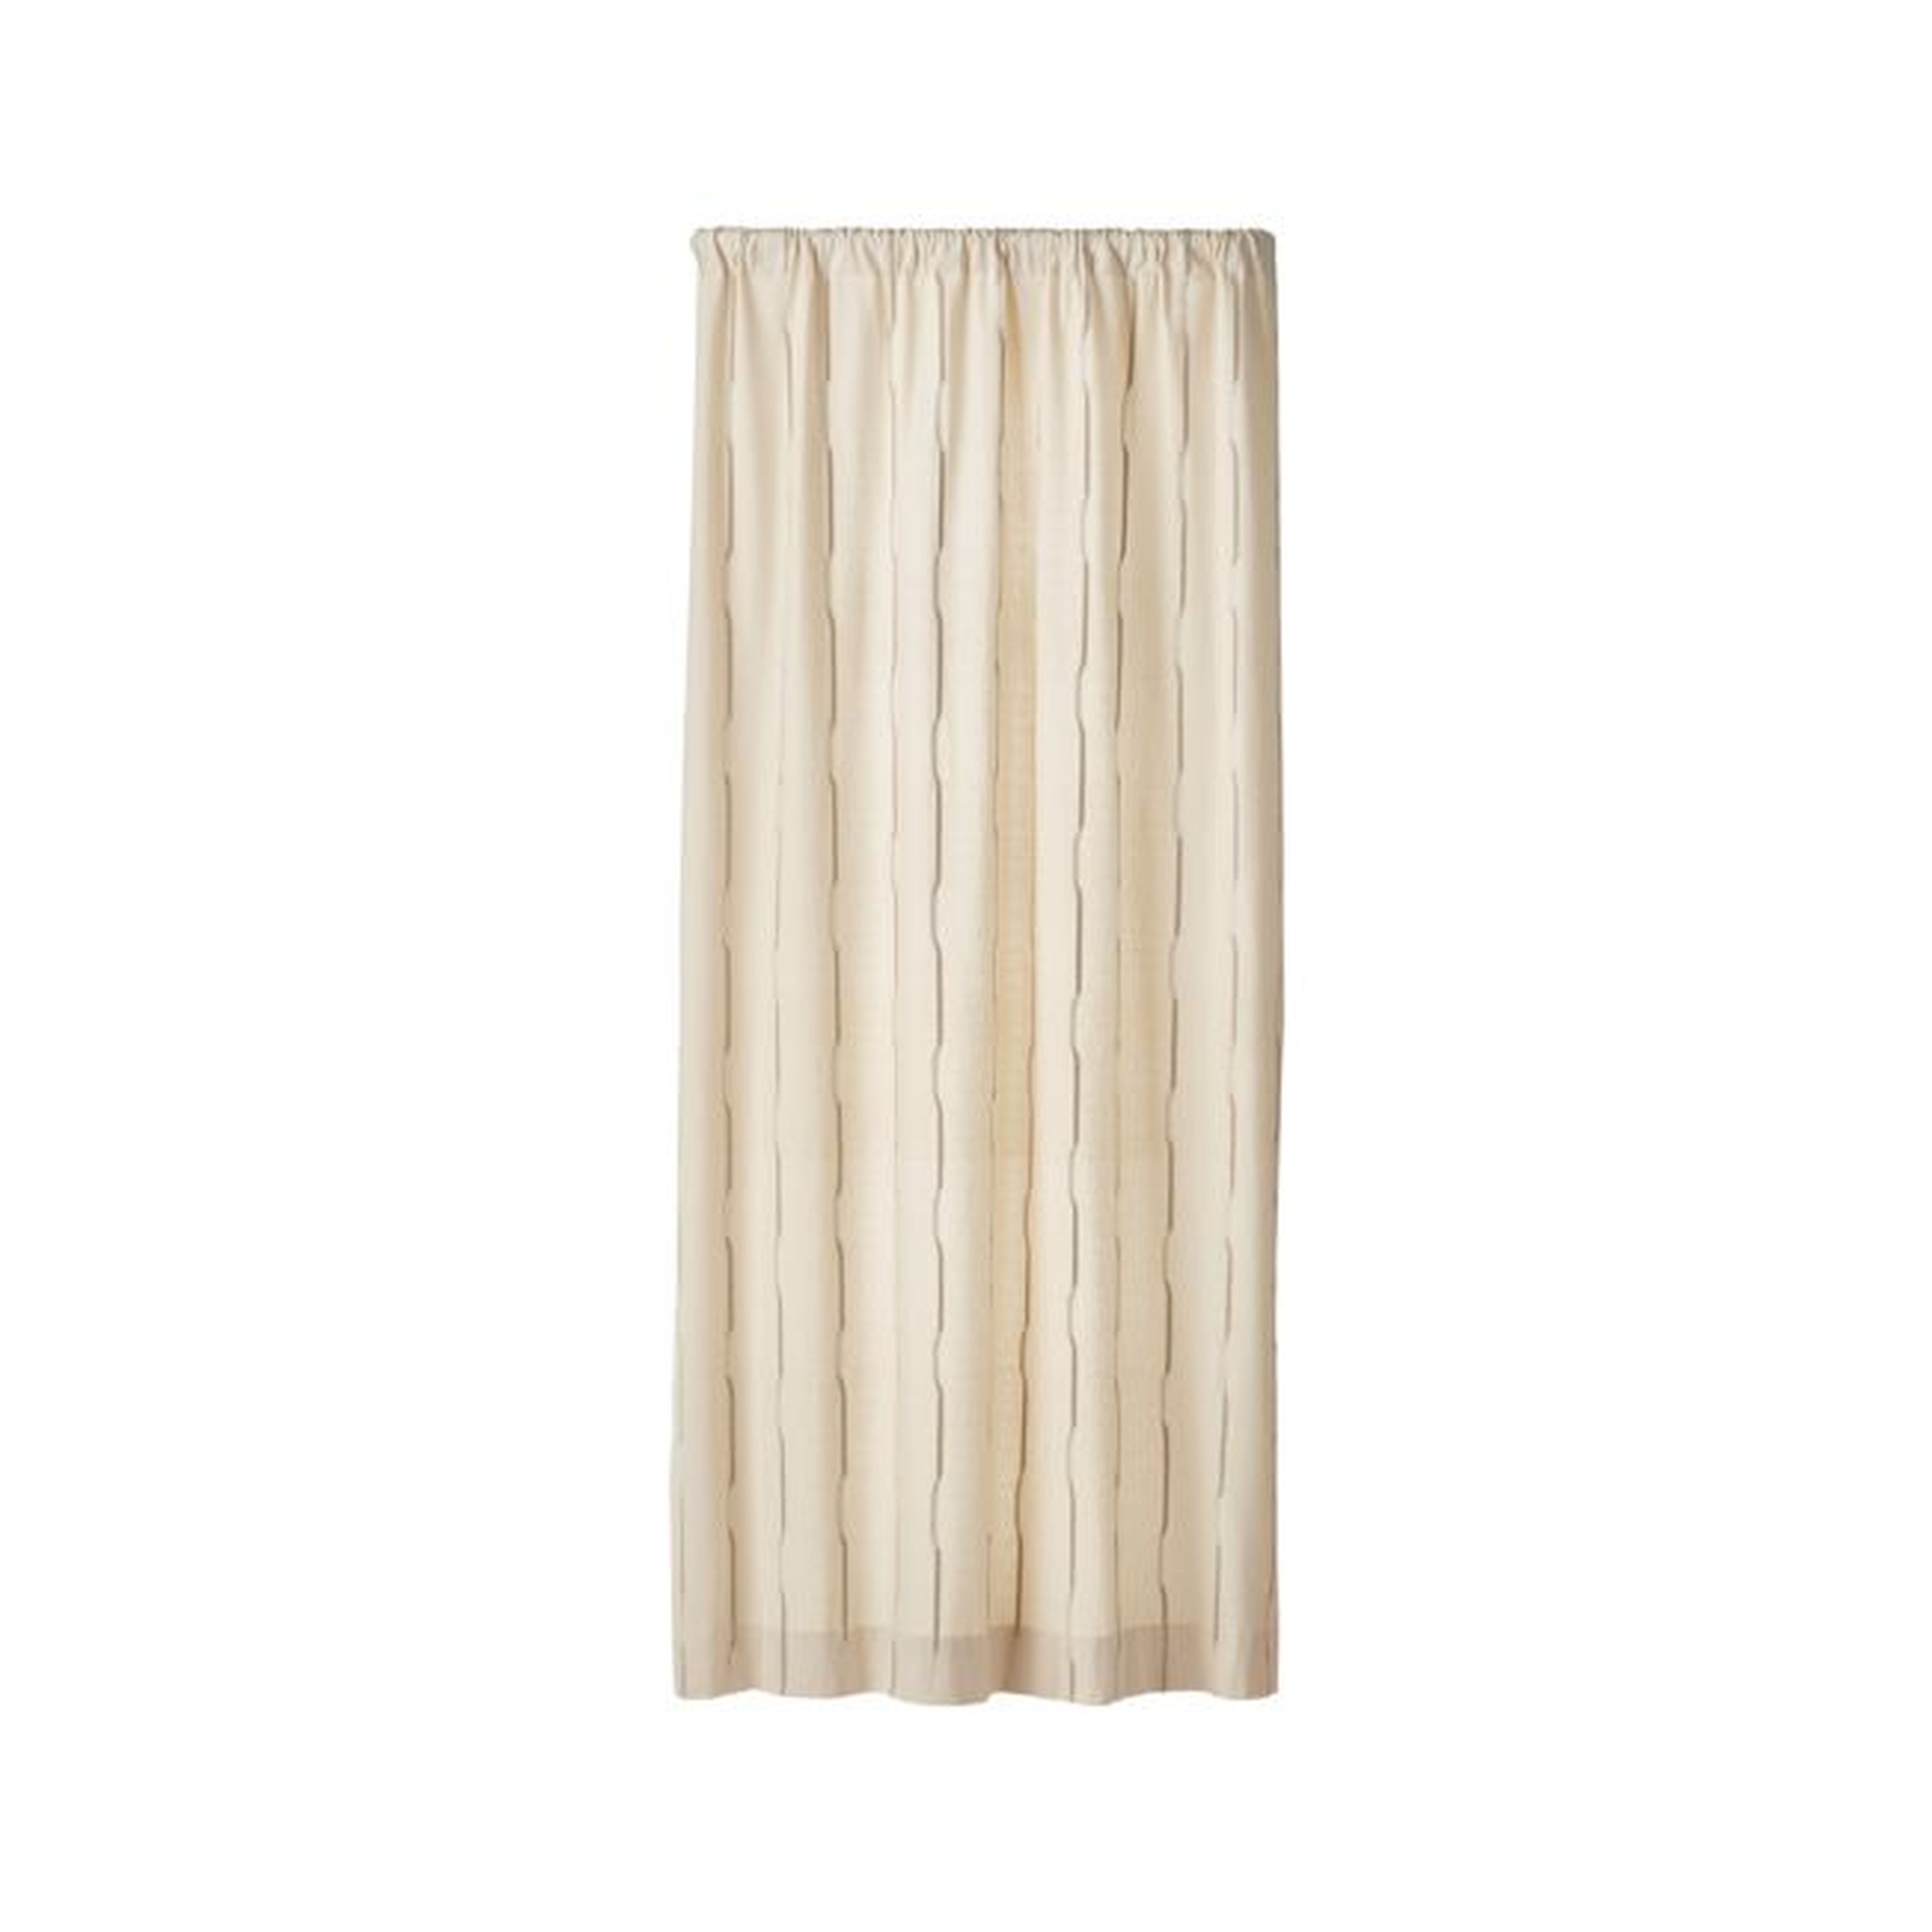 Cecily Sepia Sheer Pleated 50"x96" Curtain Panel - Crate and Barrel